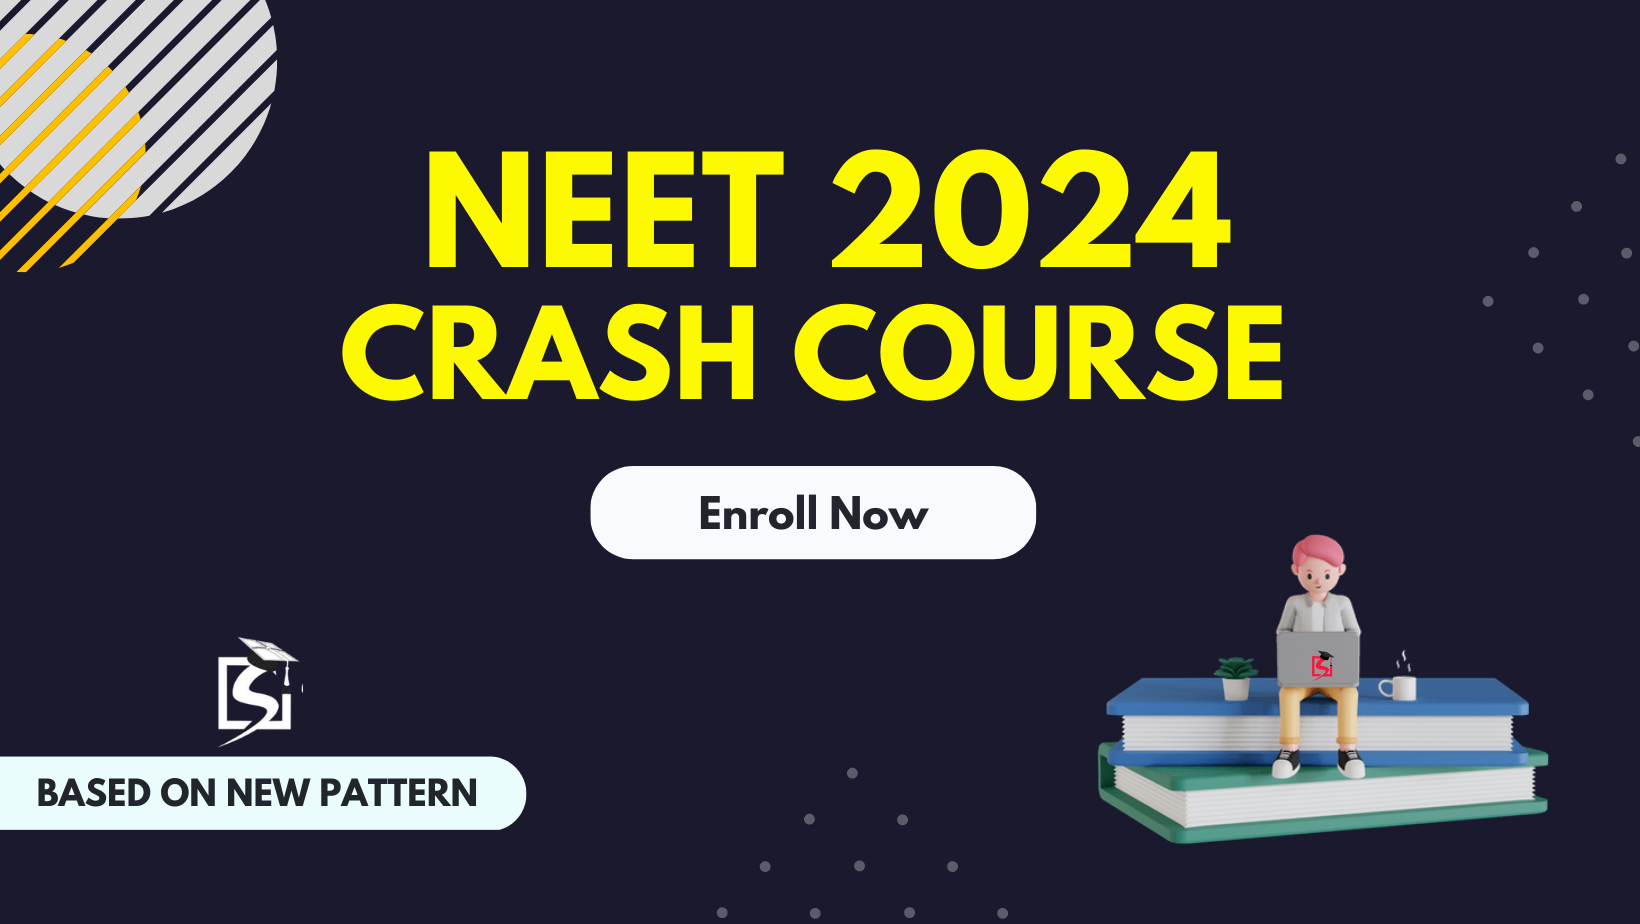 NEET Online Mock Test for 2024 - Free Test Series - Bangalore Tutoring, Lessons